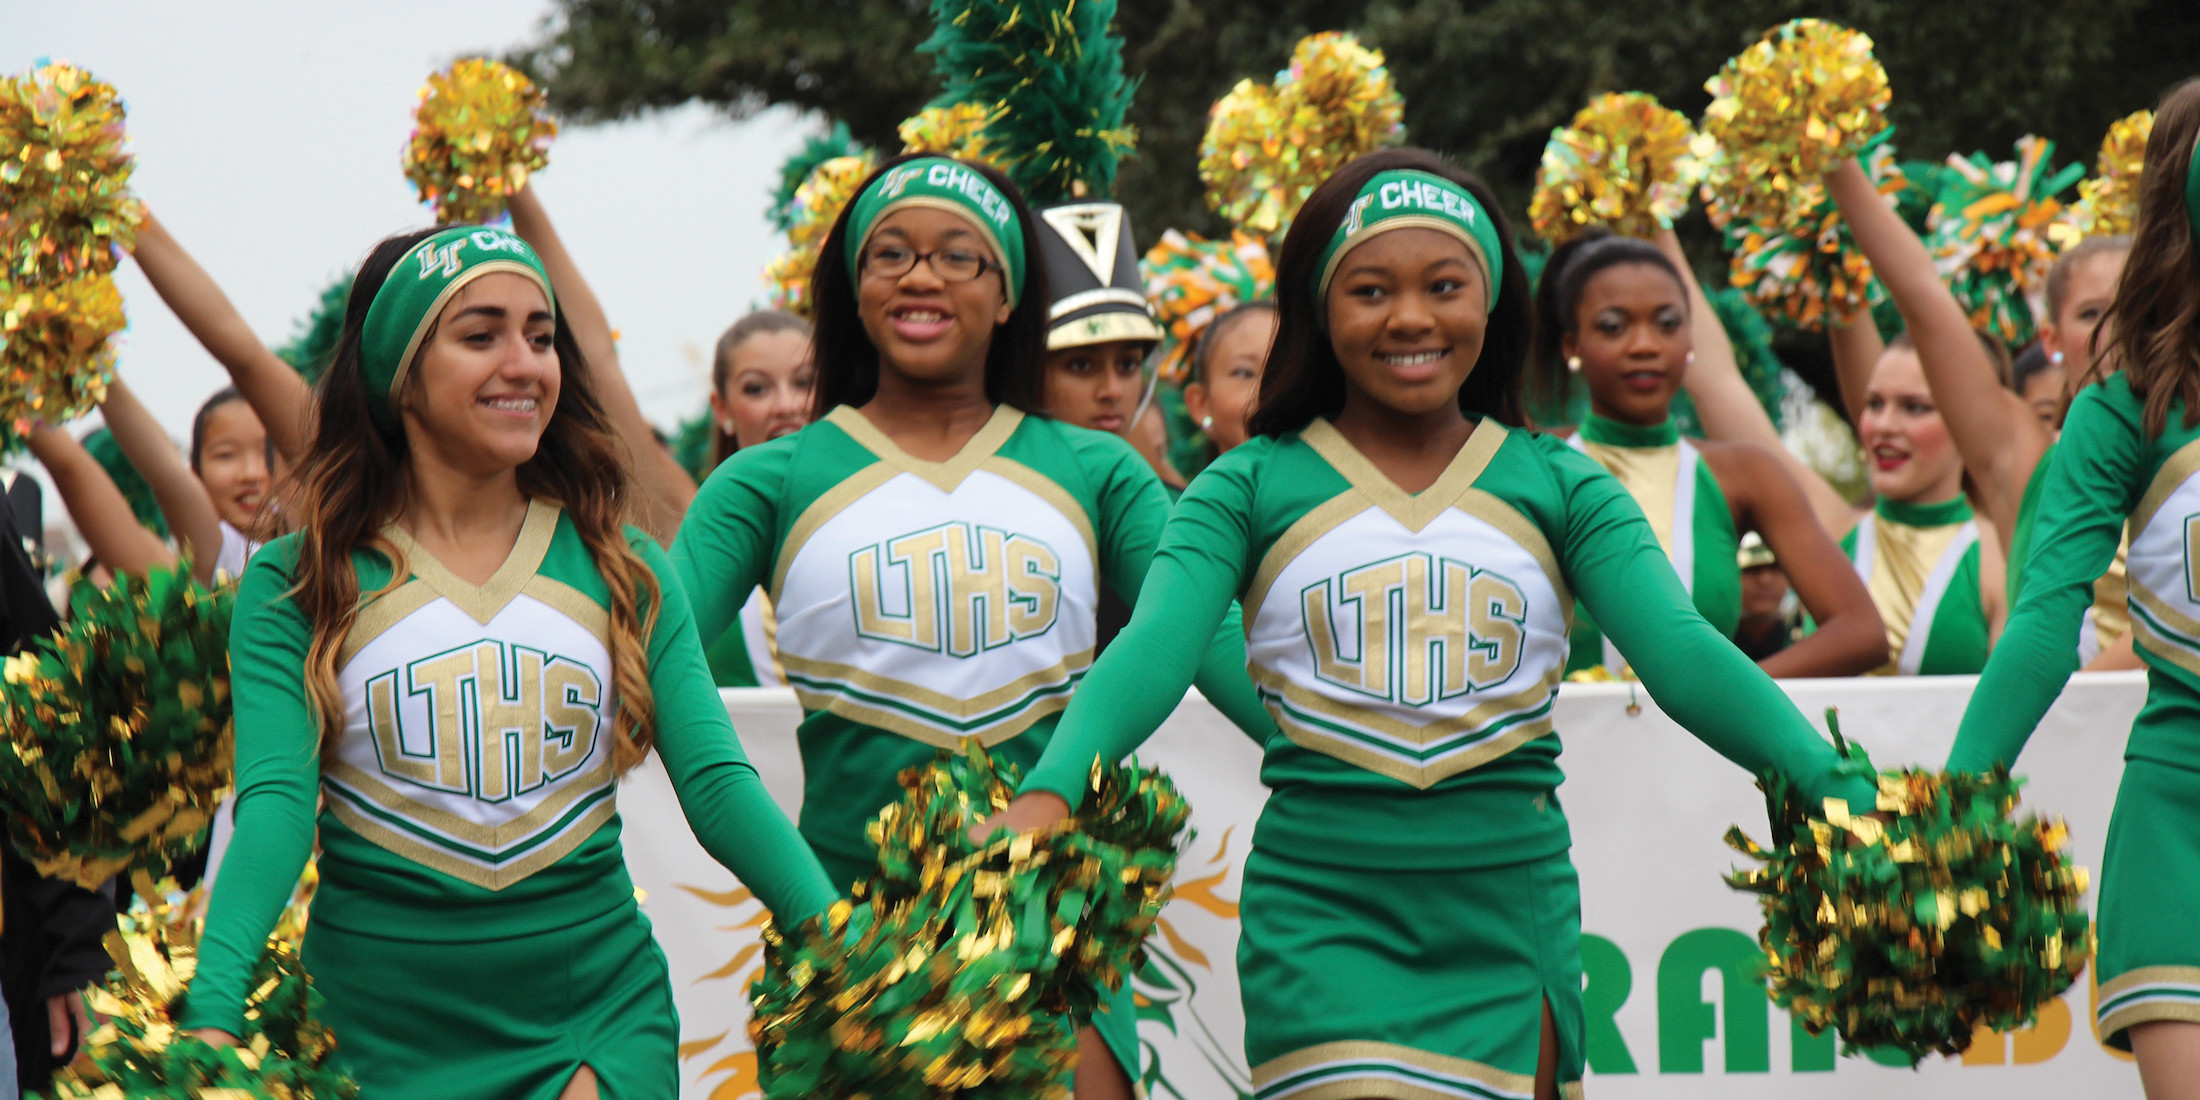 Lebanon Trail High School cheerleaders smiling with pom poms walking in a parade